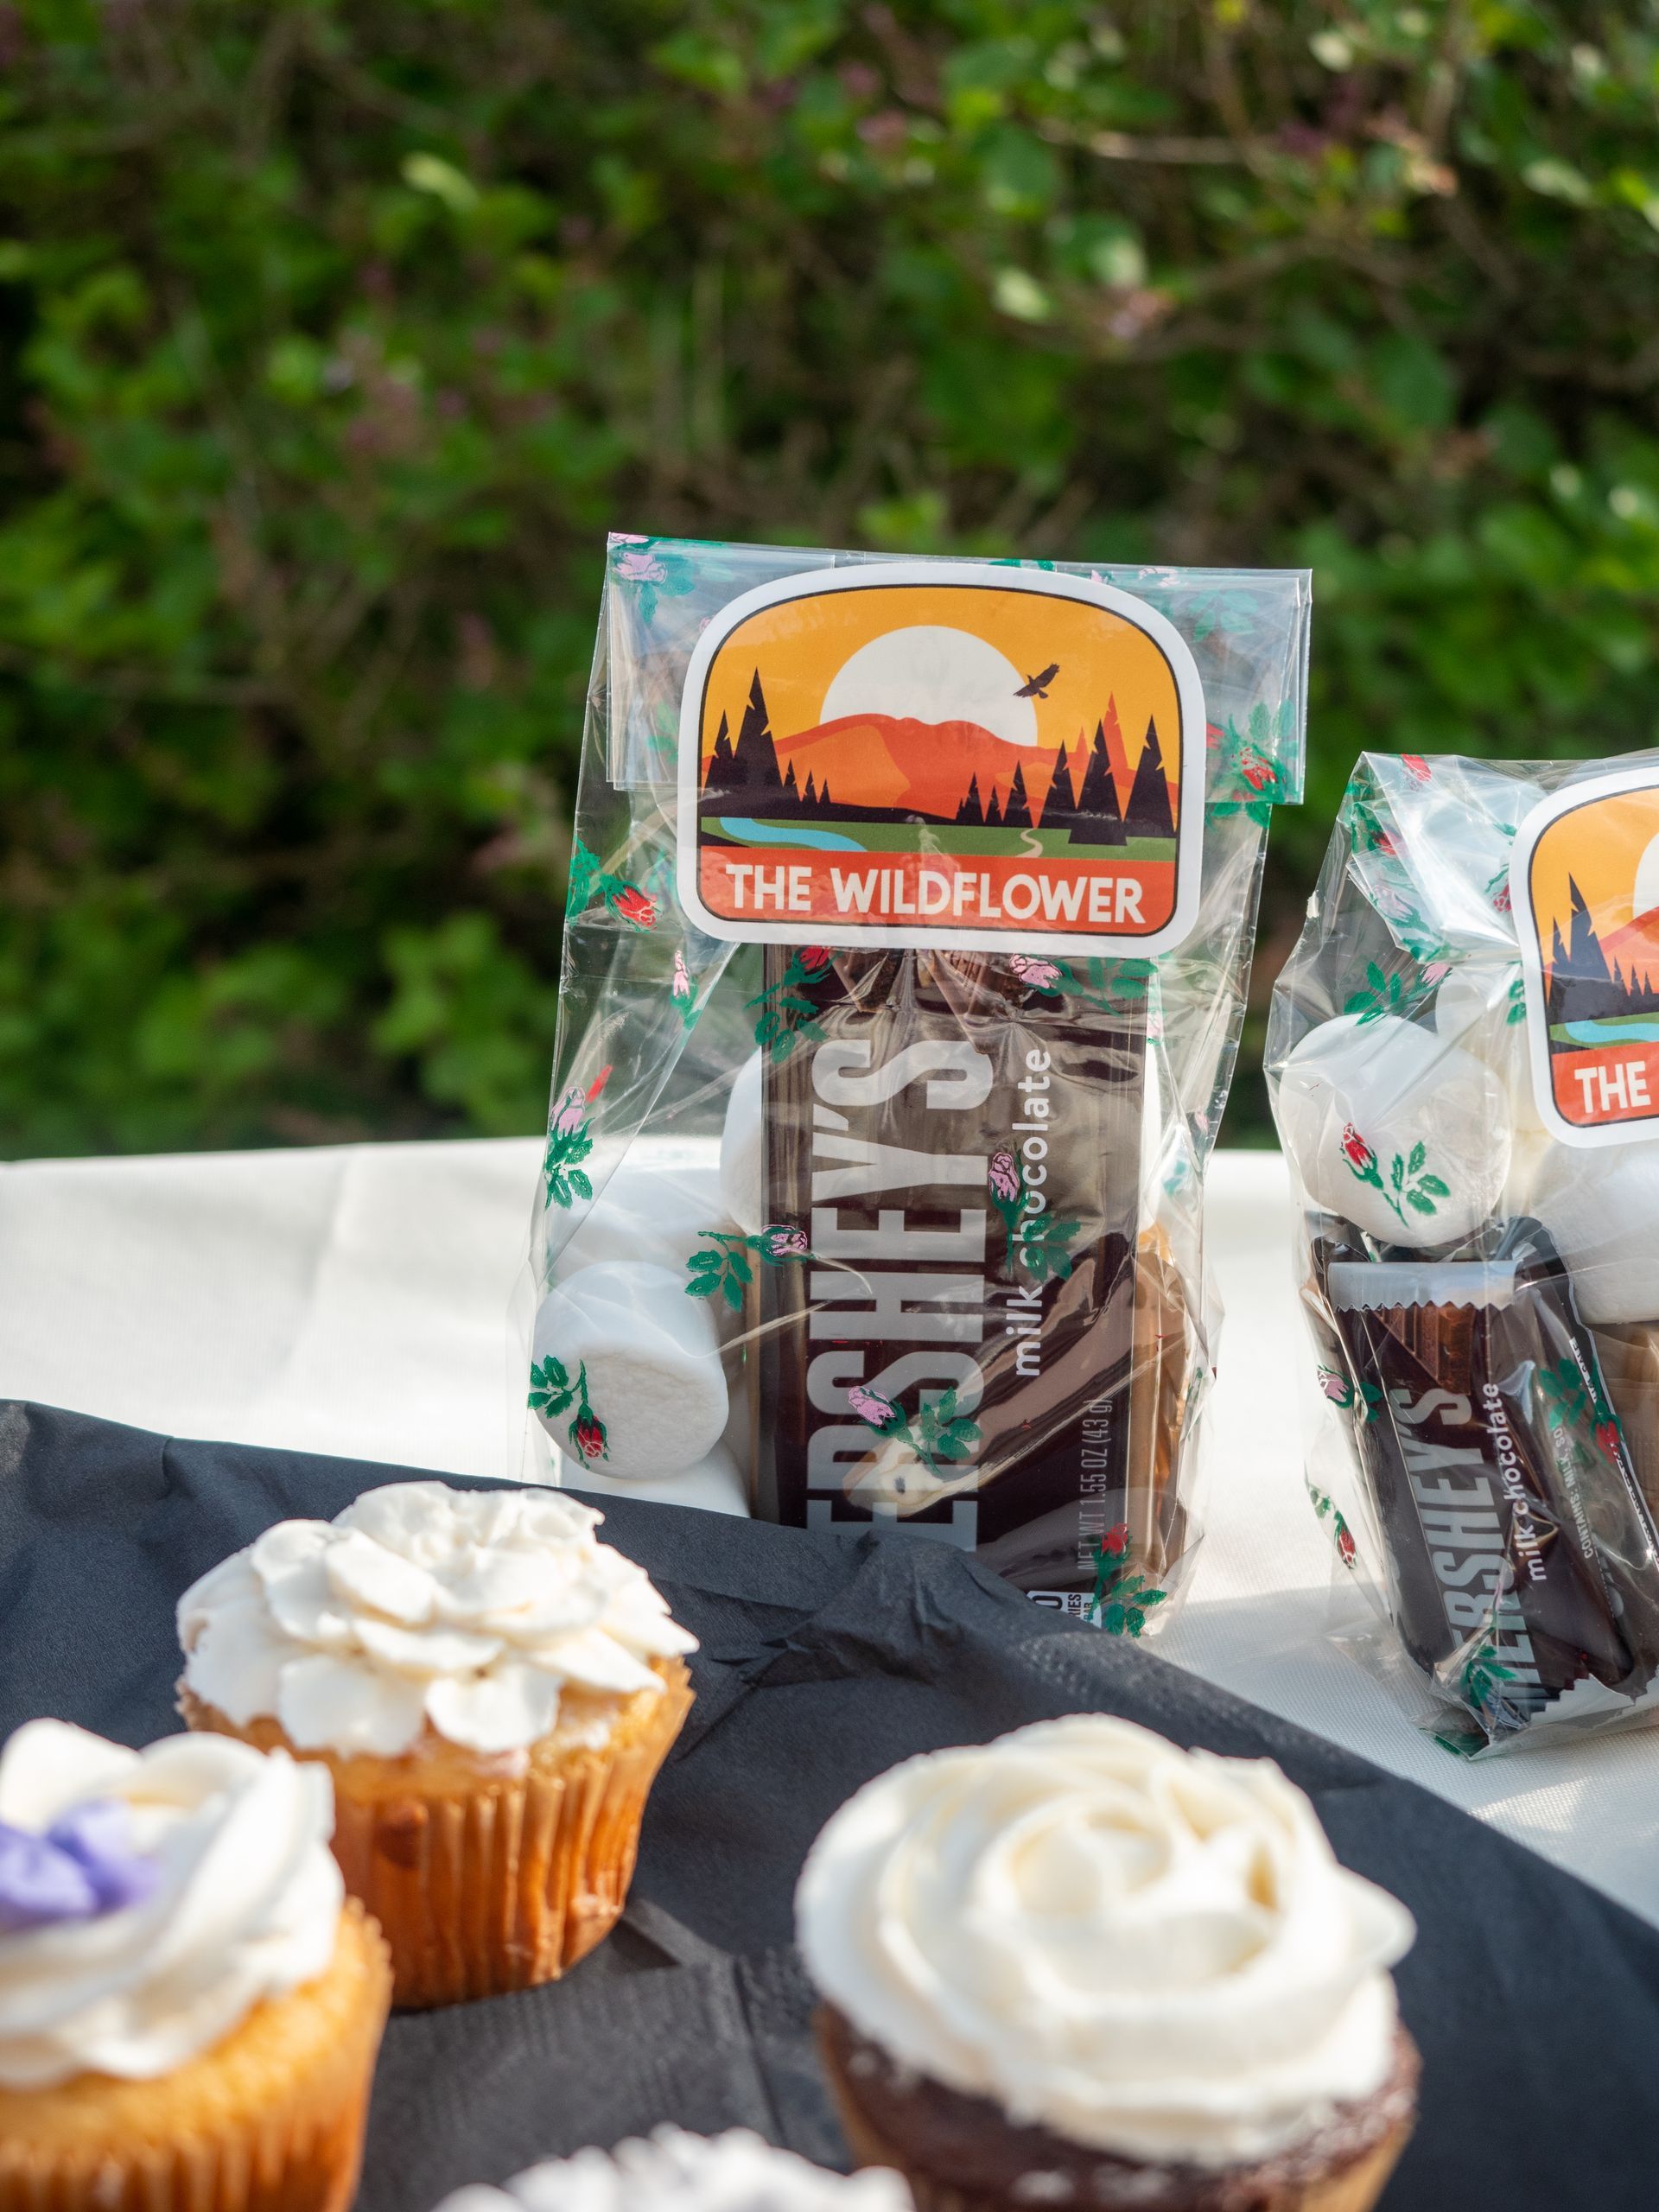 Closeup of cupcakes and a s'mores goodie bag with the Wildflower logo on it.